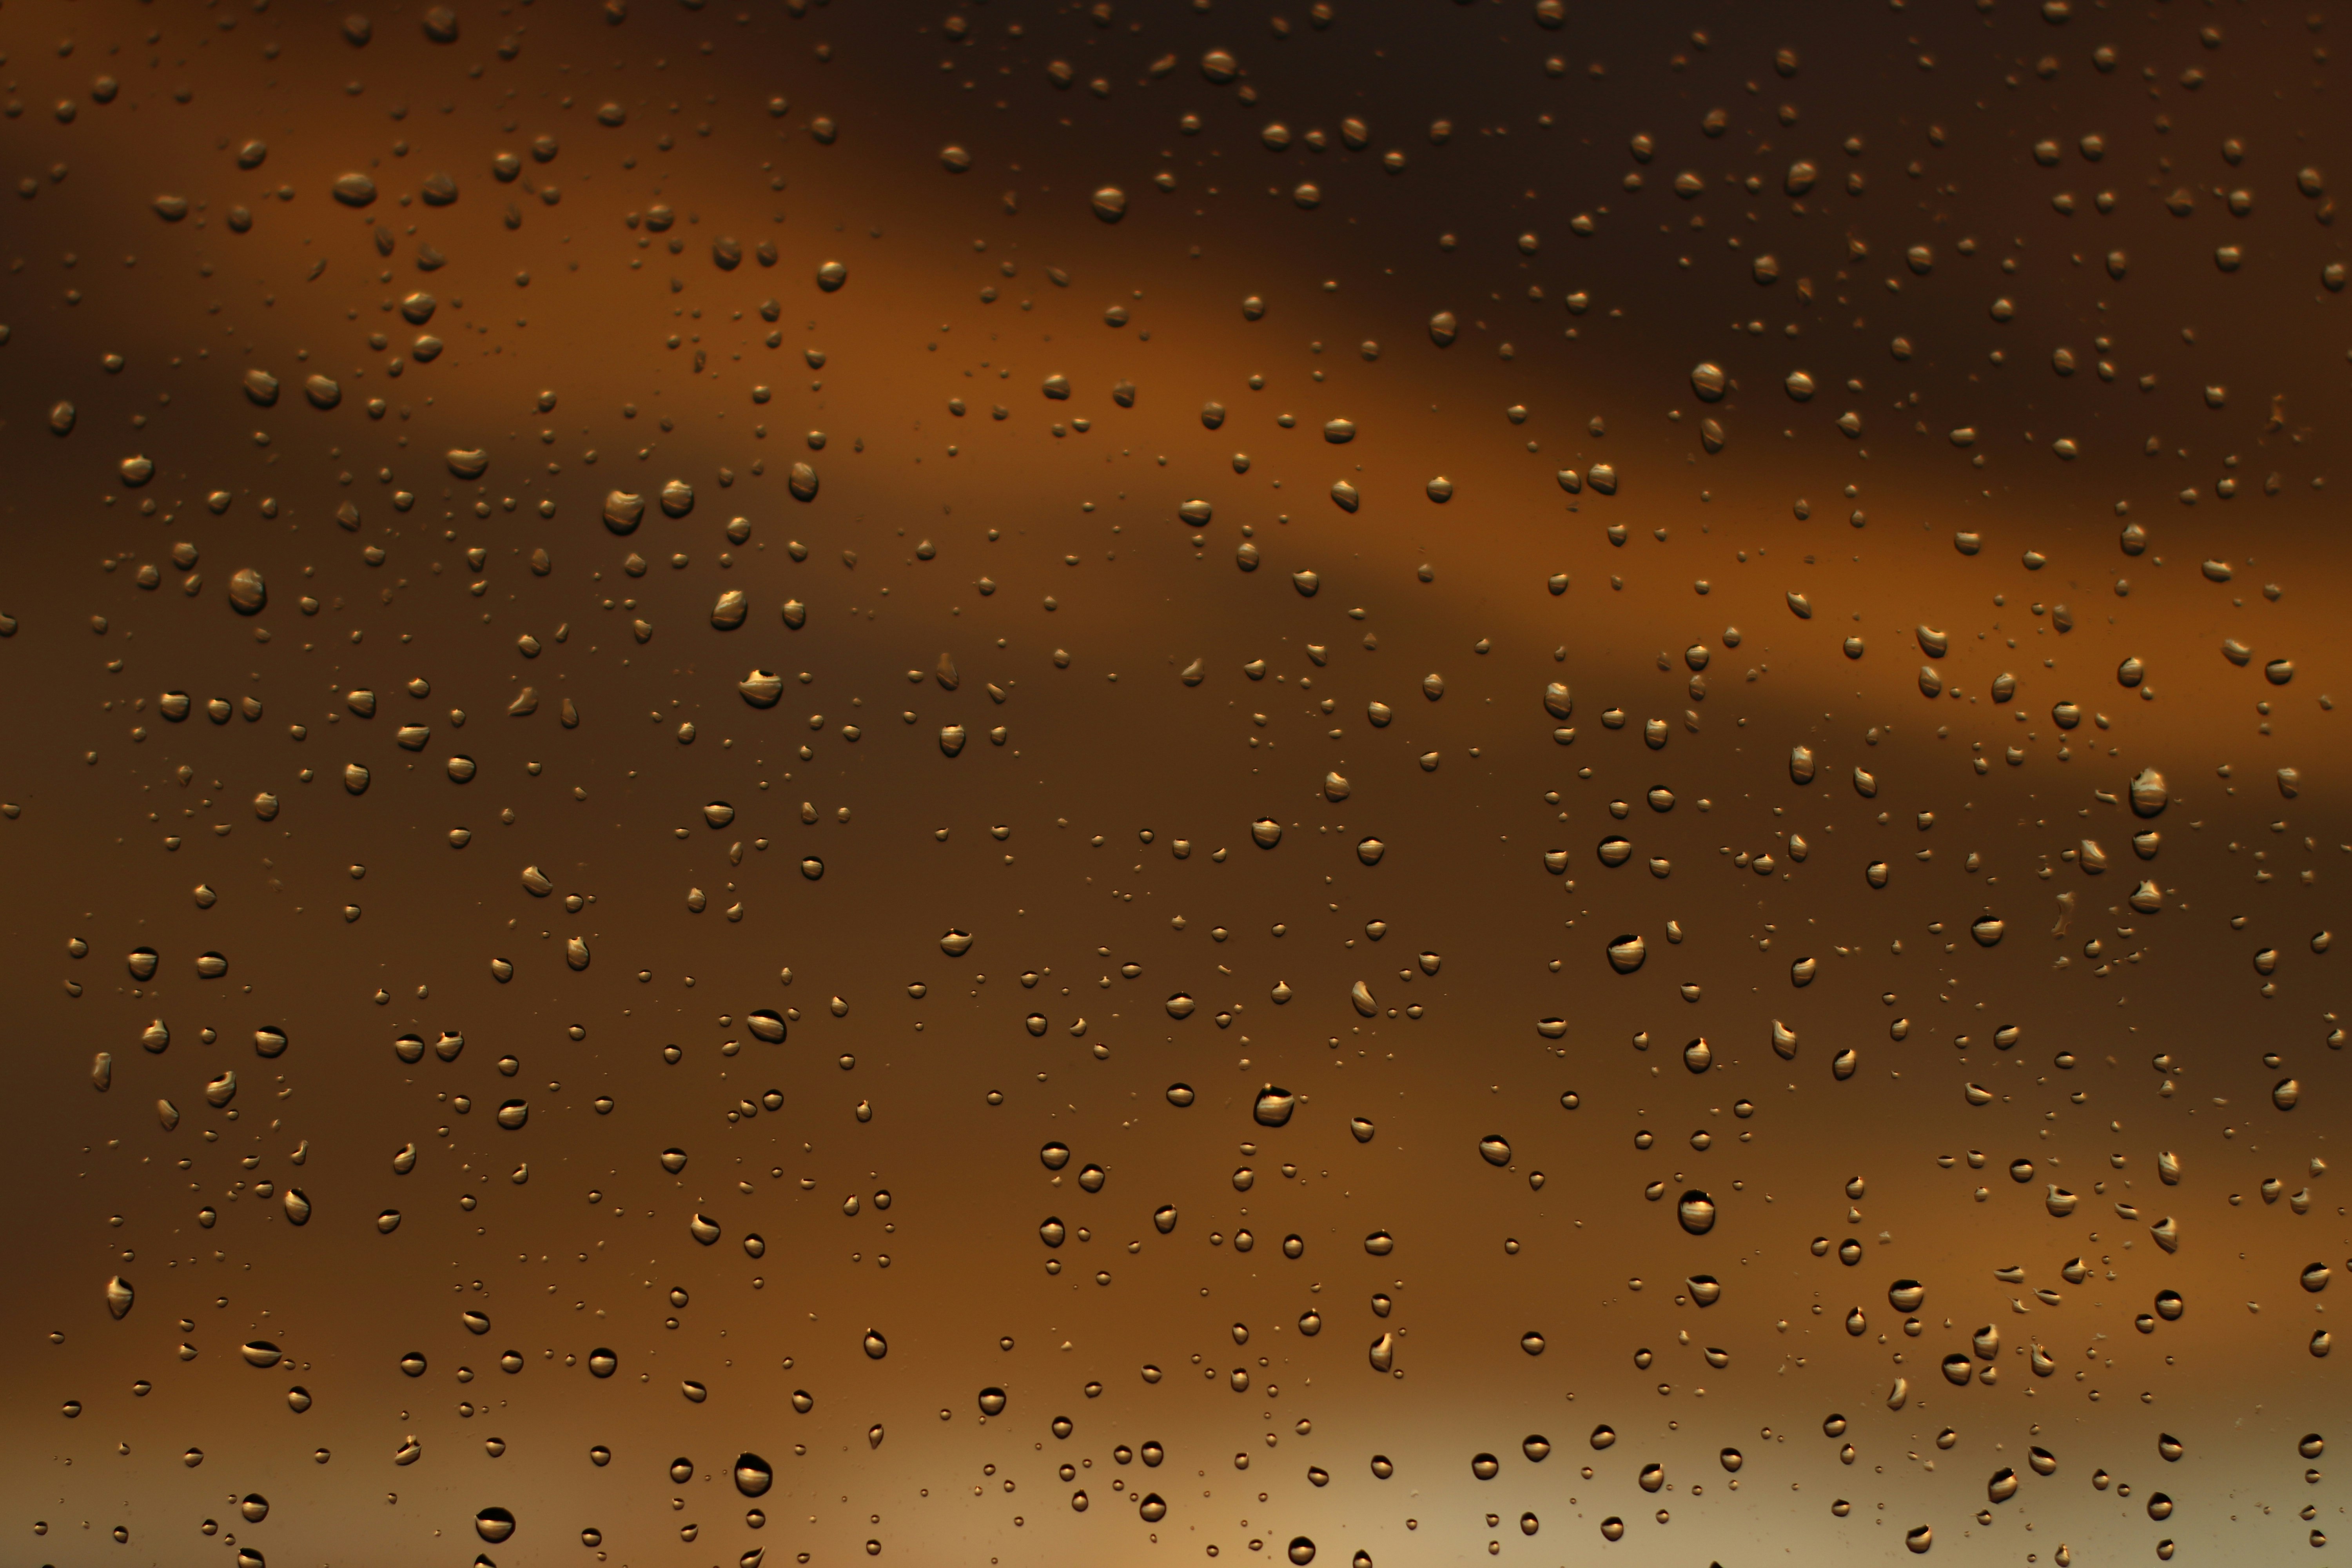 water droplets on glass pane